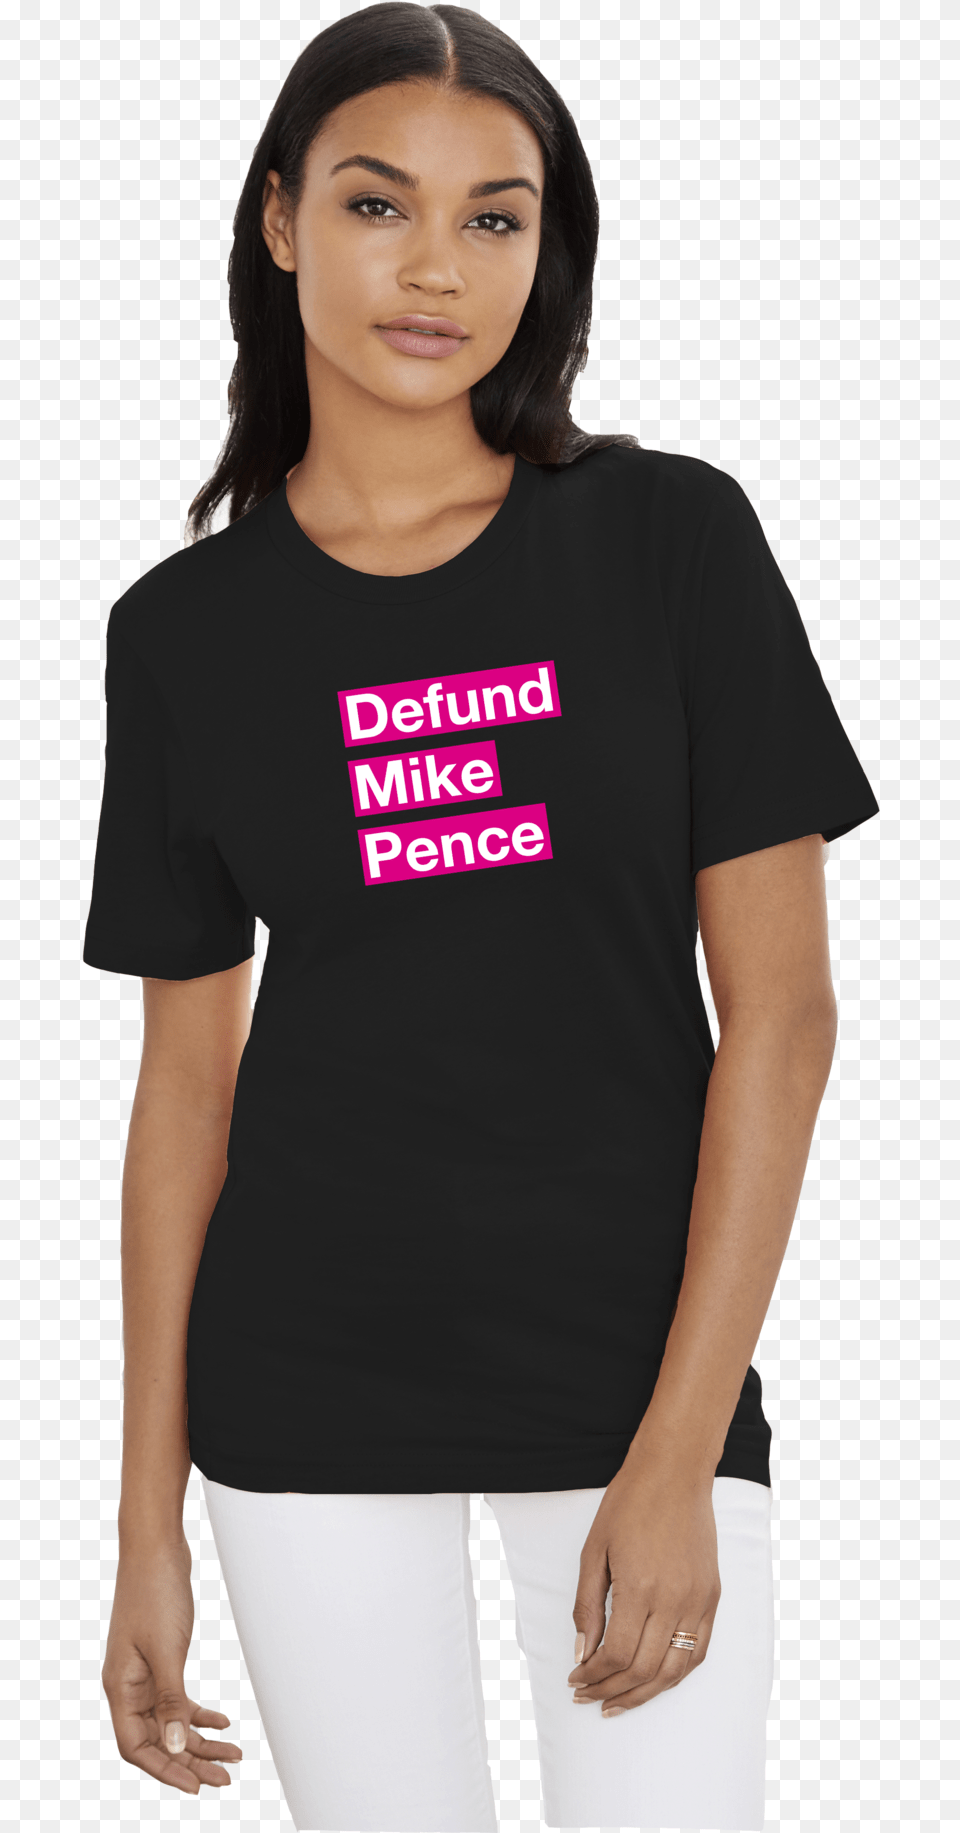 Defund Mike Pence Tee Girl, Woman, Adult, Clothing, Female Png Image